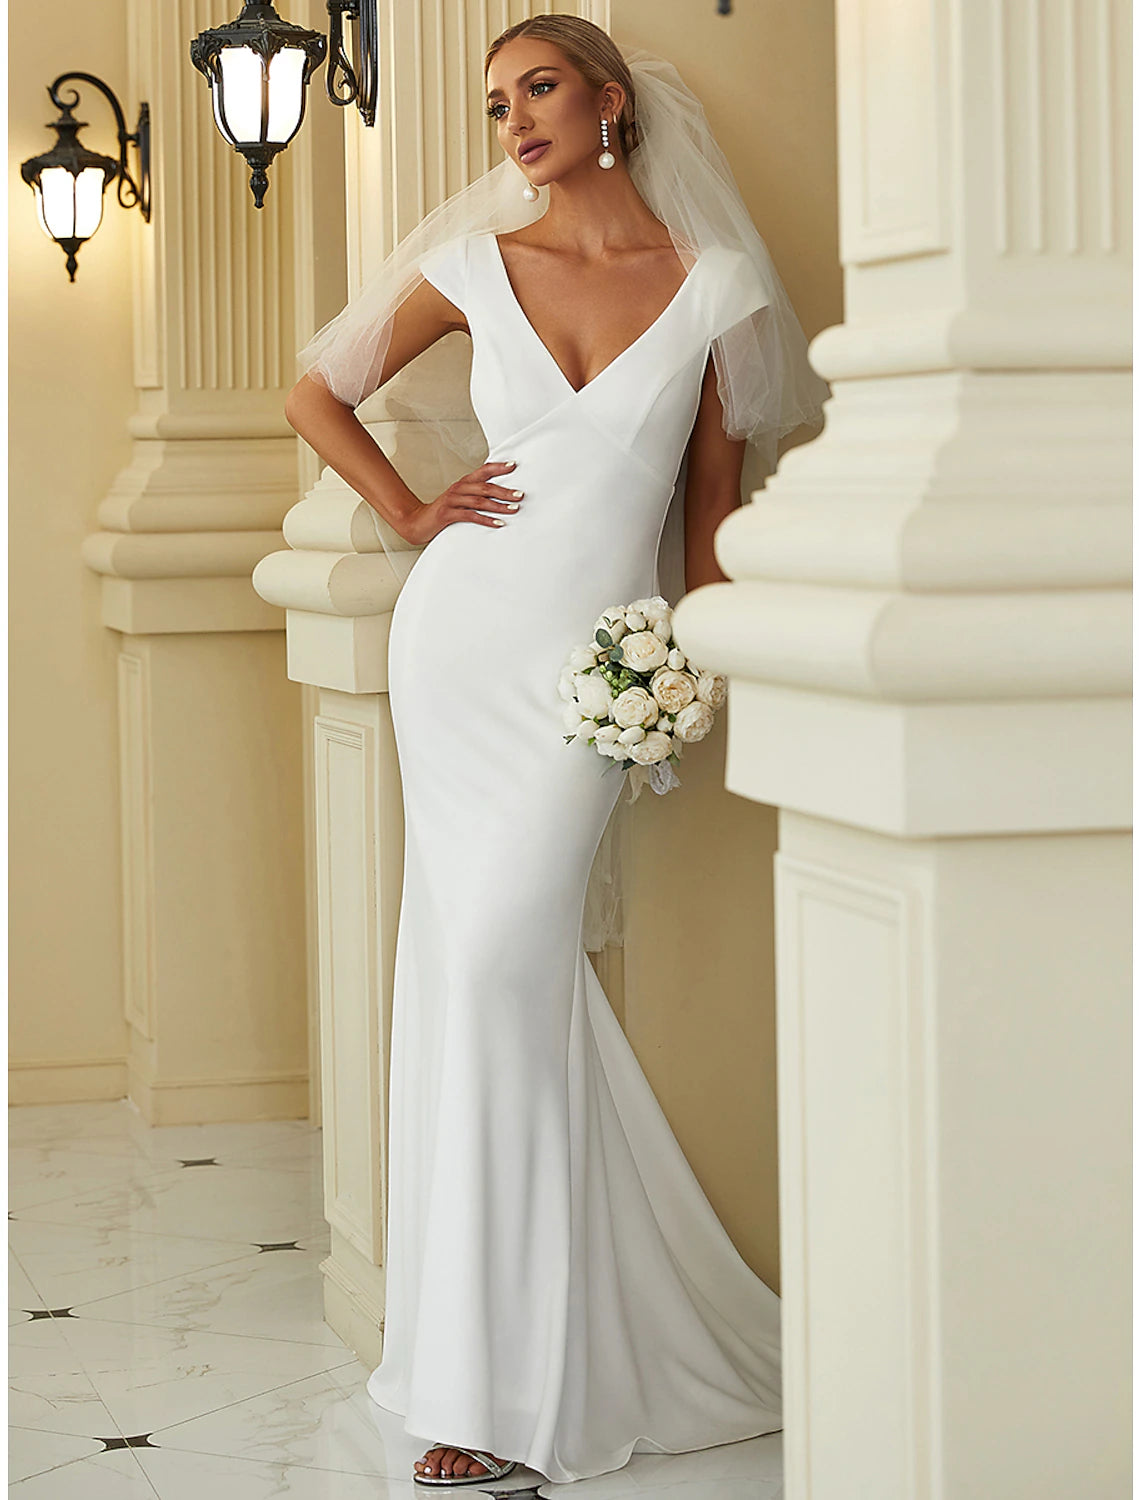 Reception Casual Wedding Dresses Mermaid / Trumpet V Neck Cap Sleeve Sweep / Brush Train Stretch Fabric Bridal Gowns With Draping Solid Colo